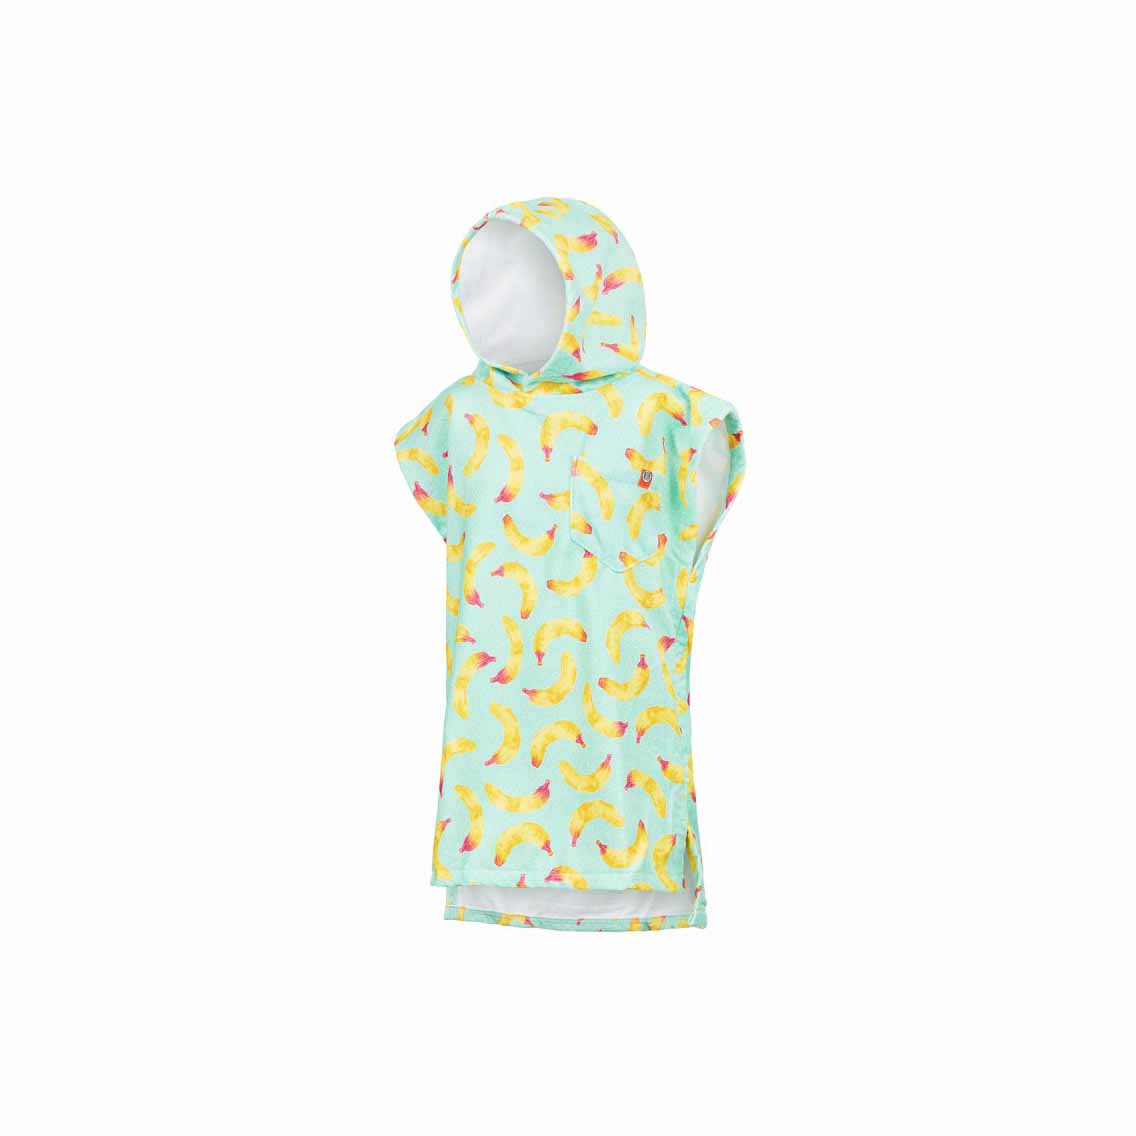 After Essentials Toddler Poncho Towel – Banana Stain